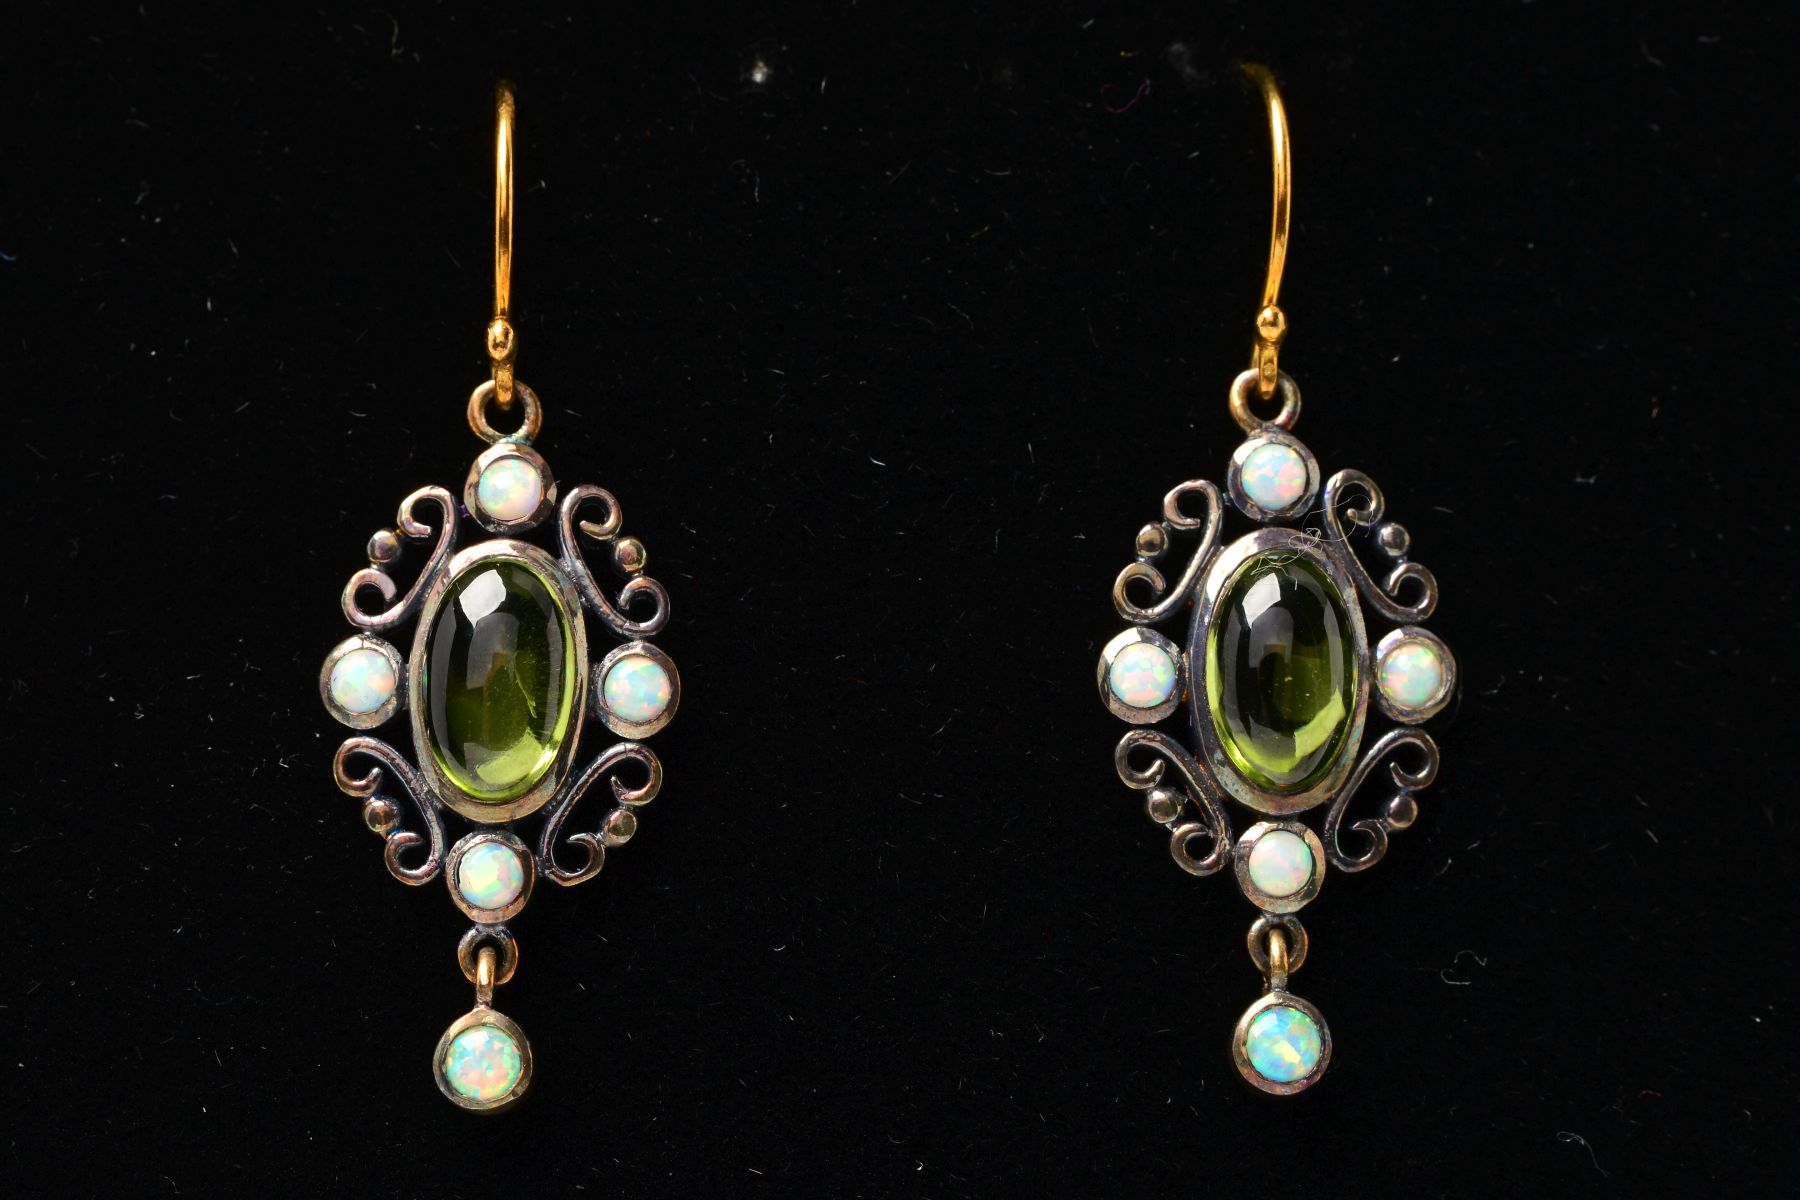 A PAIR OF PERIDOT AND OPAL PENDANT EARRINGS, each designed as a central oval peridot cabochon within